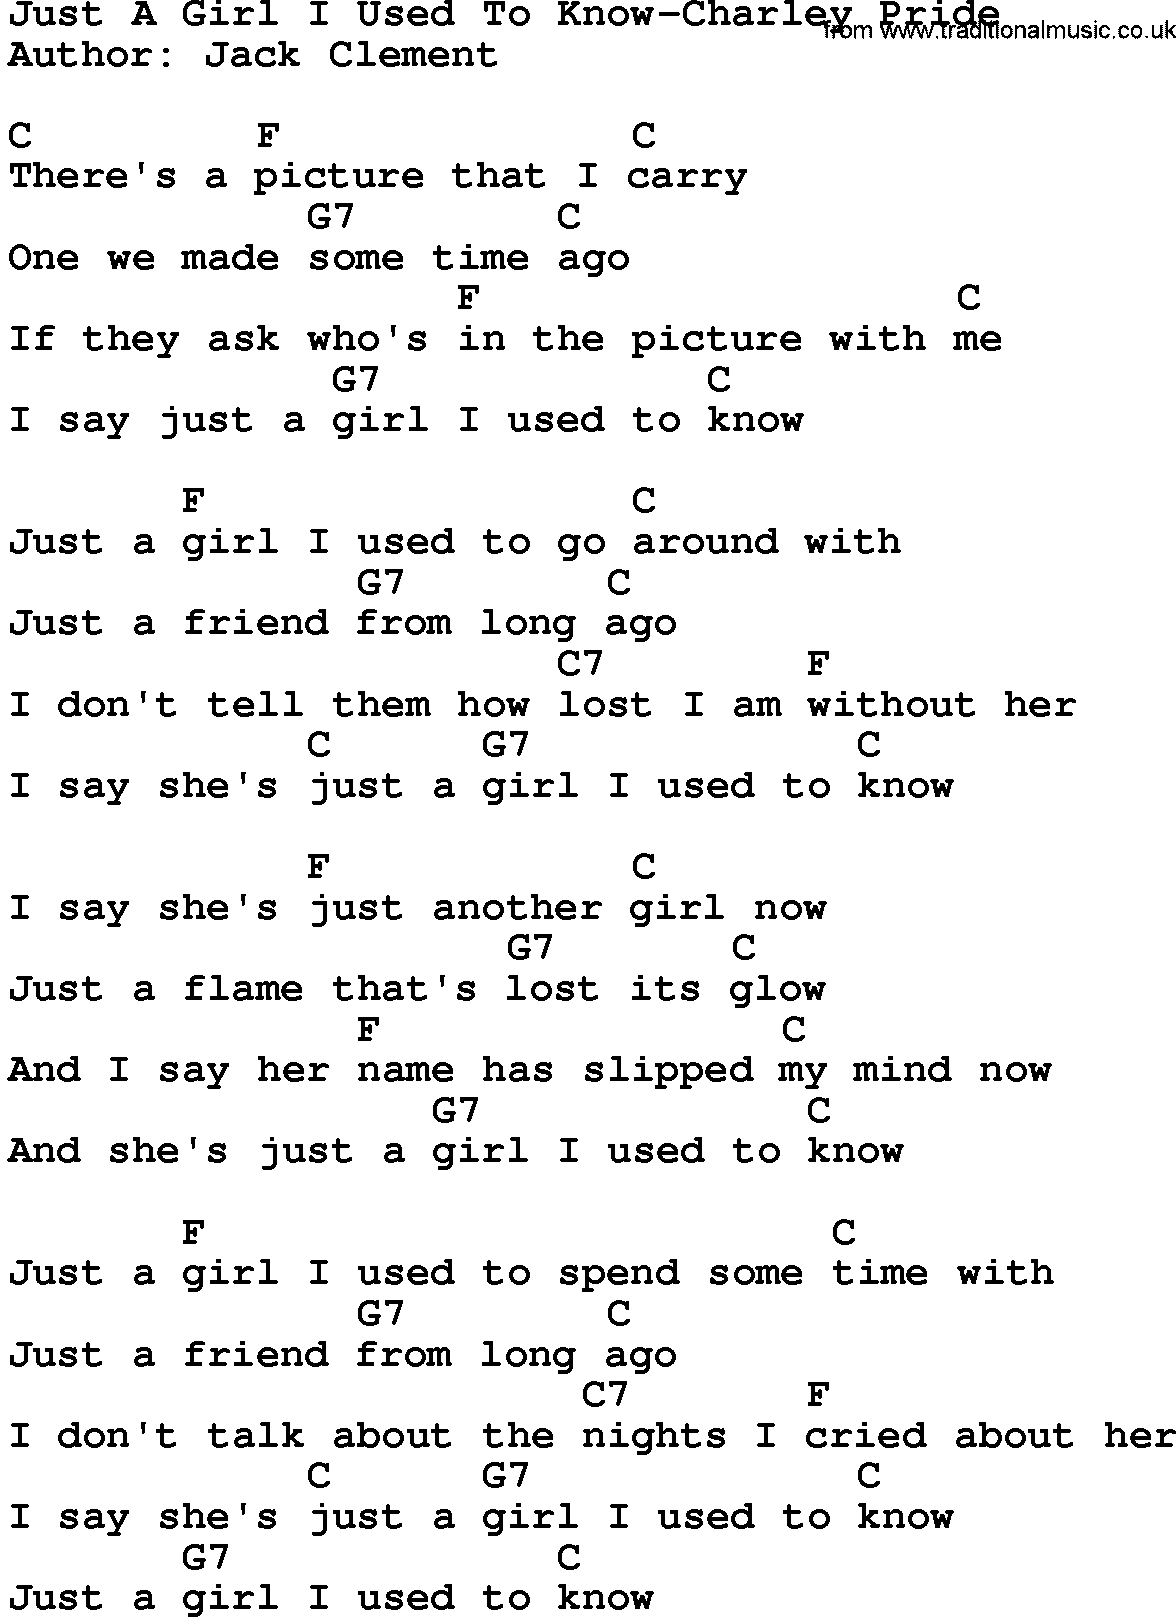 Country music song: Just A Girl I Used To Know-Charley Pride lyrics and chords